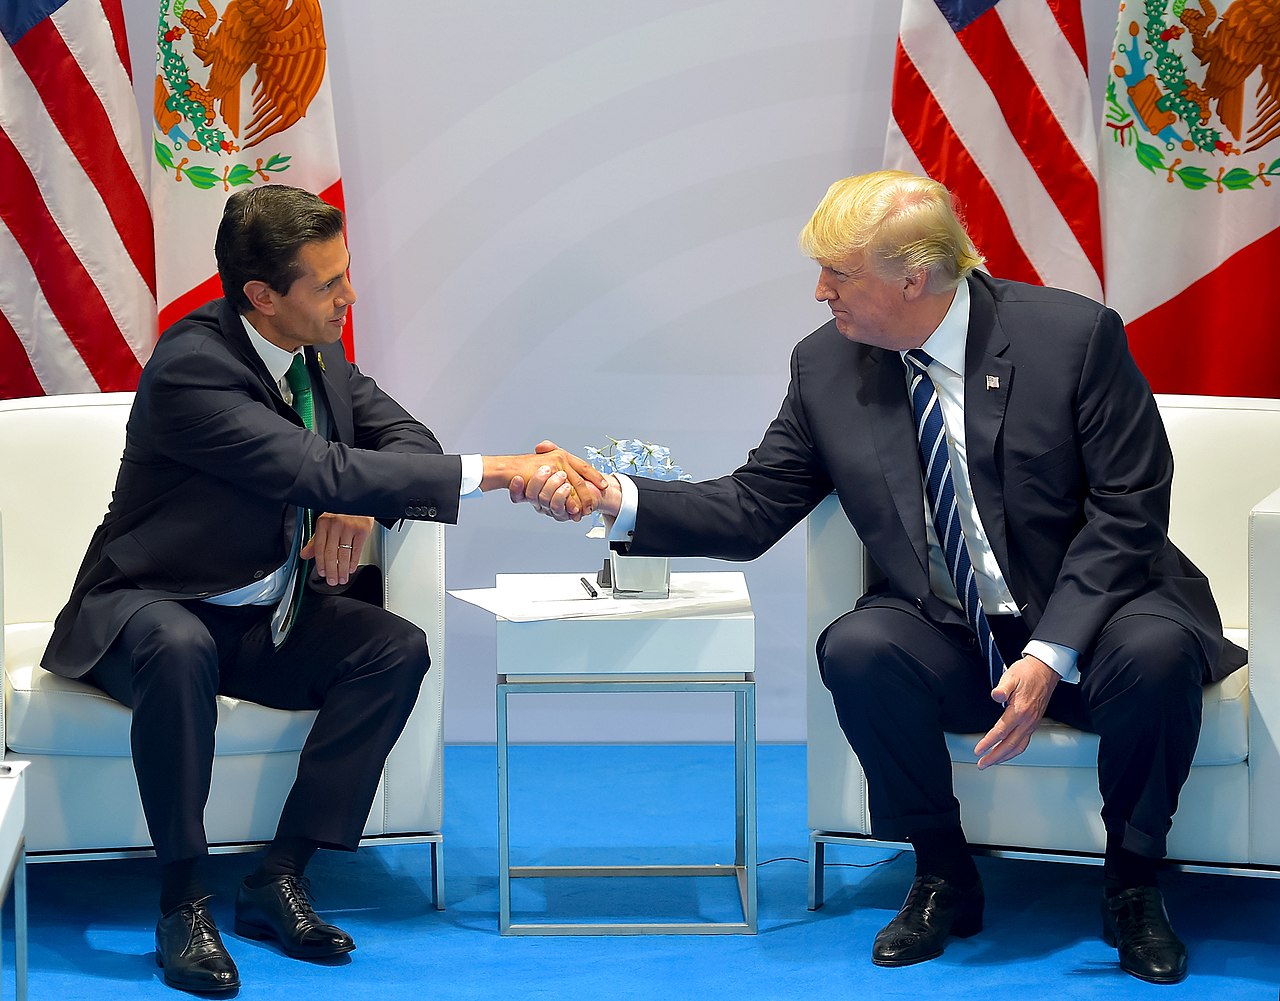 Mexico-United States relations: Since 1945